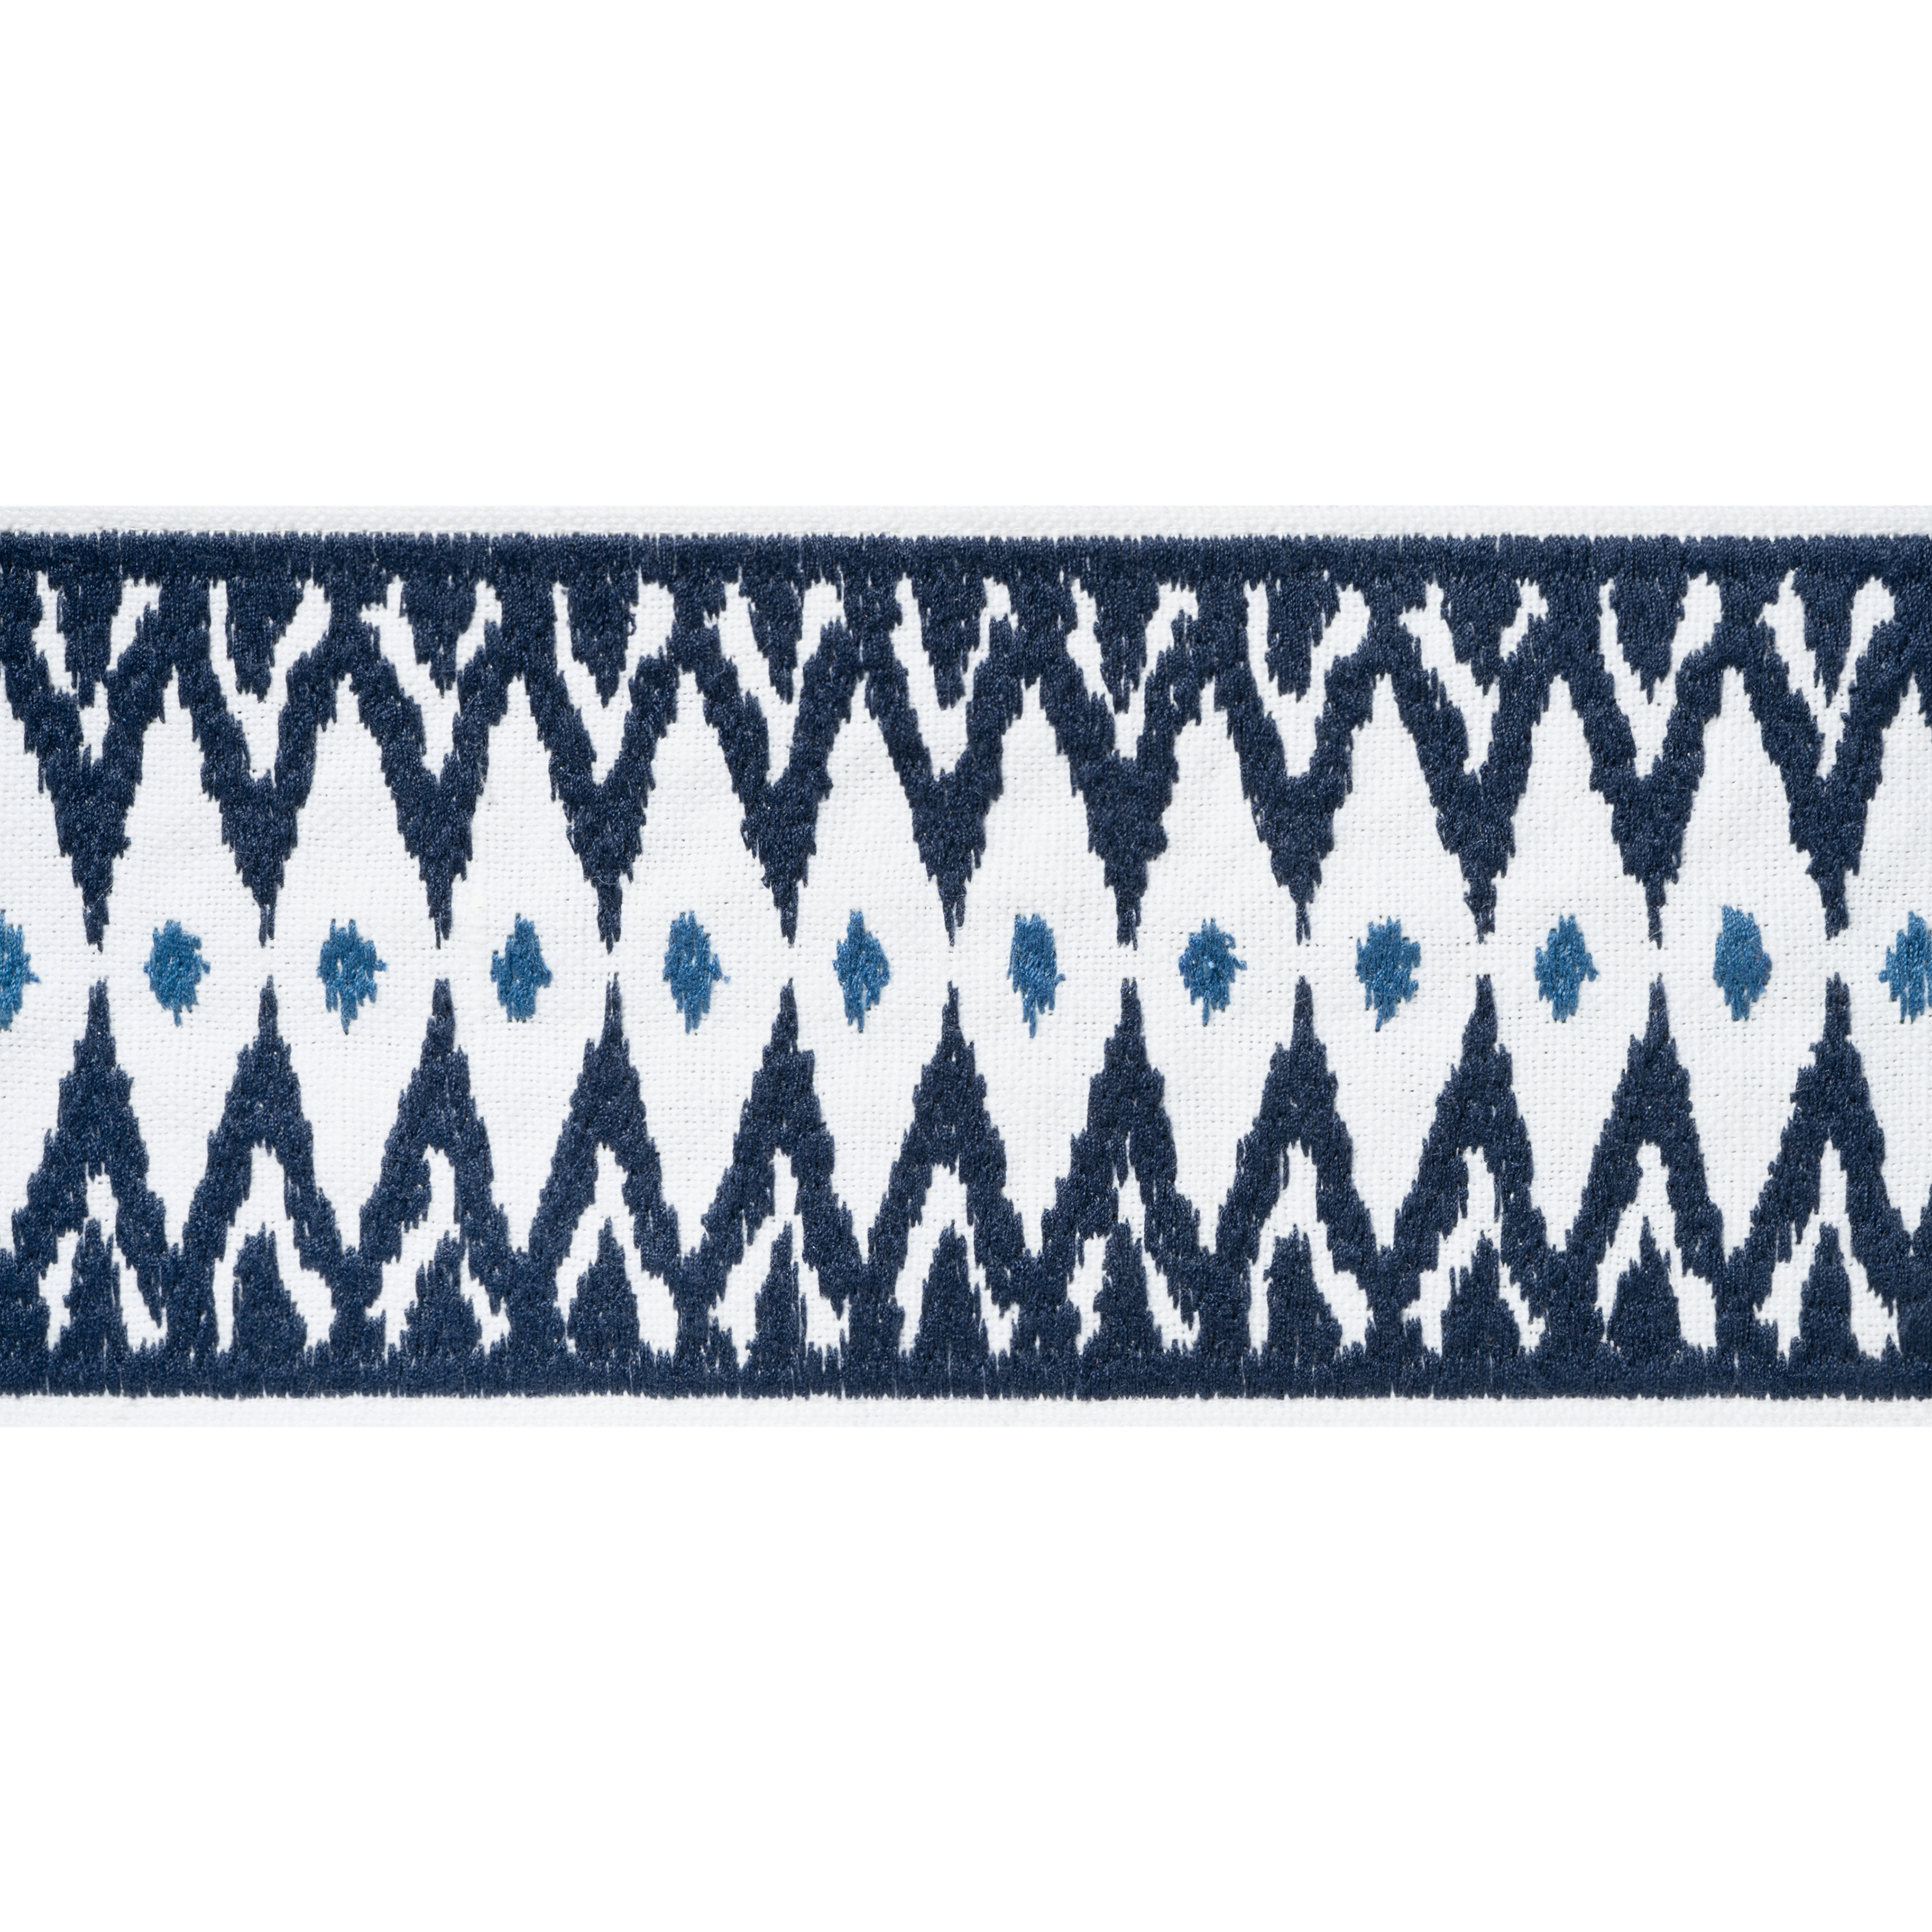 collection & DELMONT Navy Thibaut Volume the Tapes 2 Trims TAPE Trims: from E12047 and Tapes